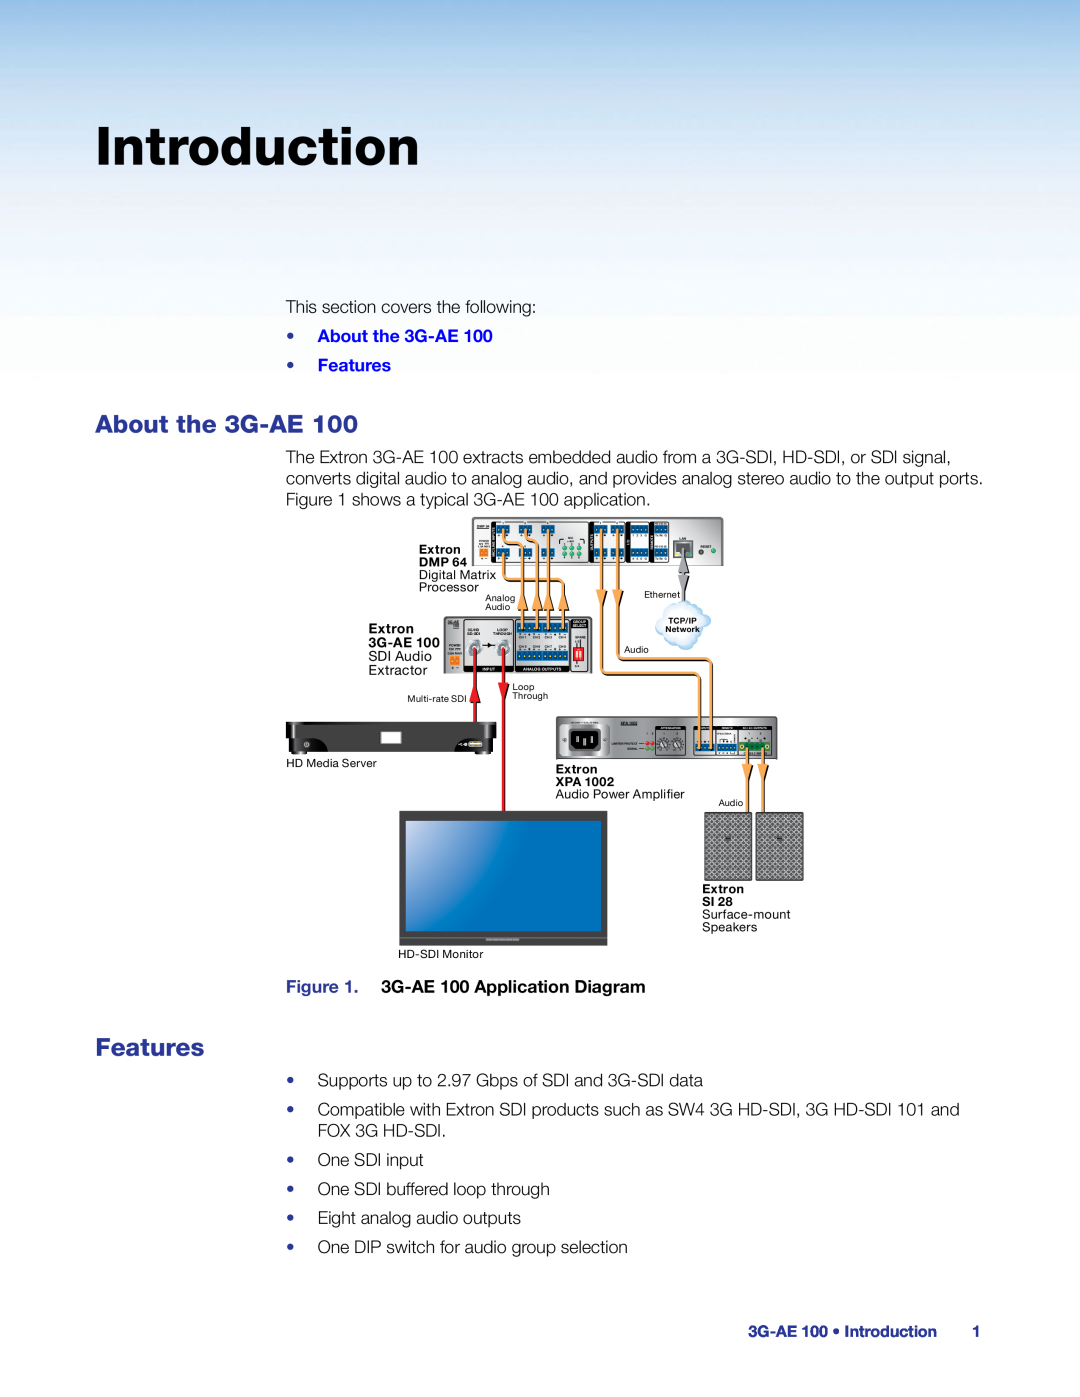 Extron electronic 3G-AE 100 manual Introduction, About the 3G-AE100 Features 